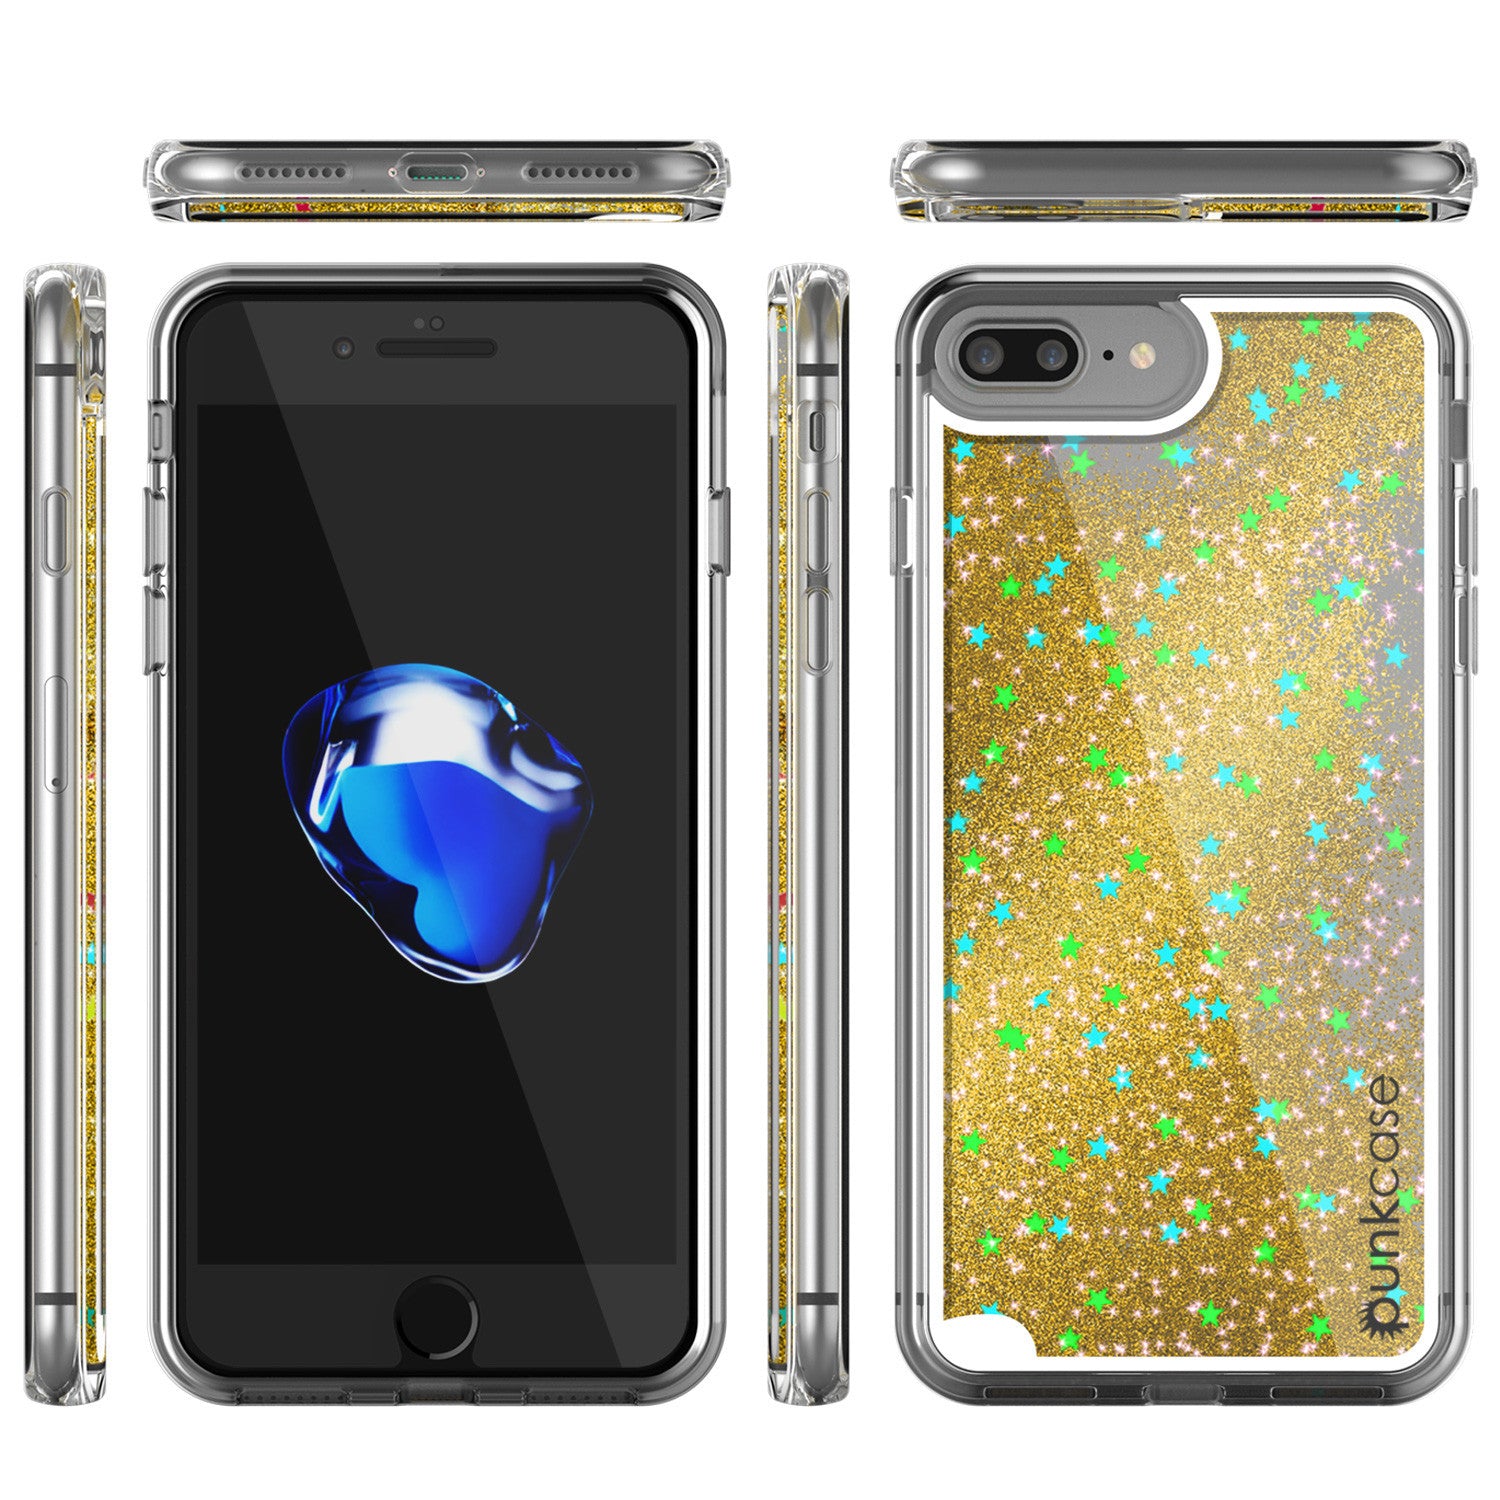 iPhone 7 Plus Case, PunkСase LIQUID Gold Series, Protective Dual Layer Floating Glitter Cover